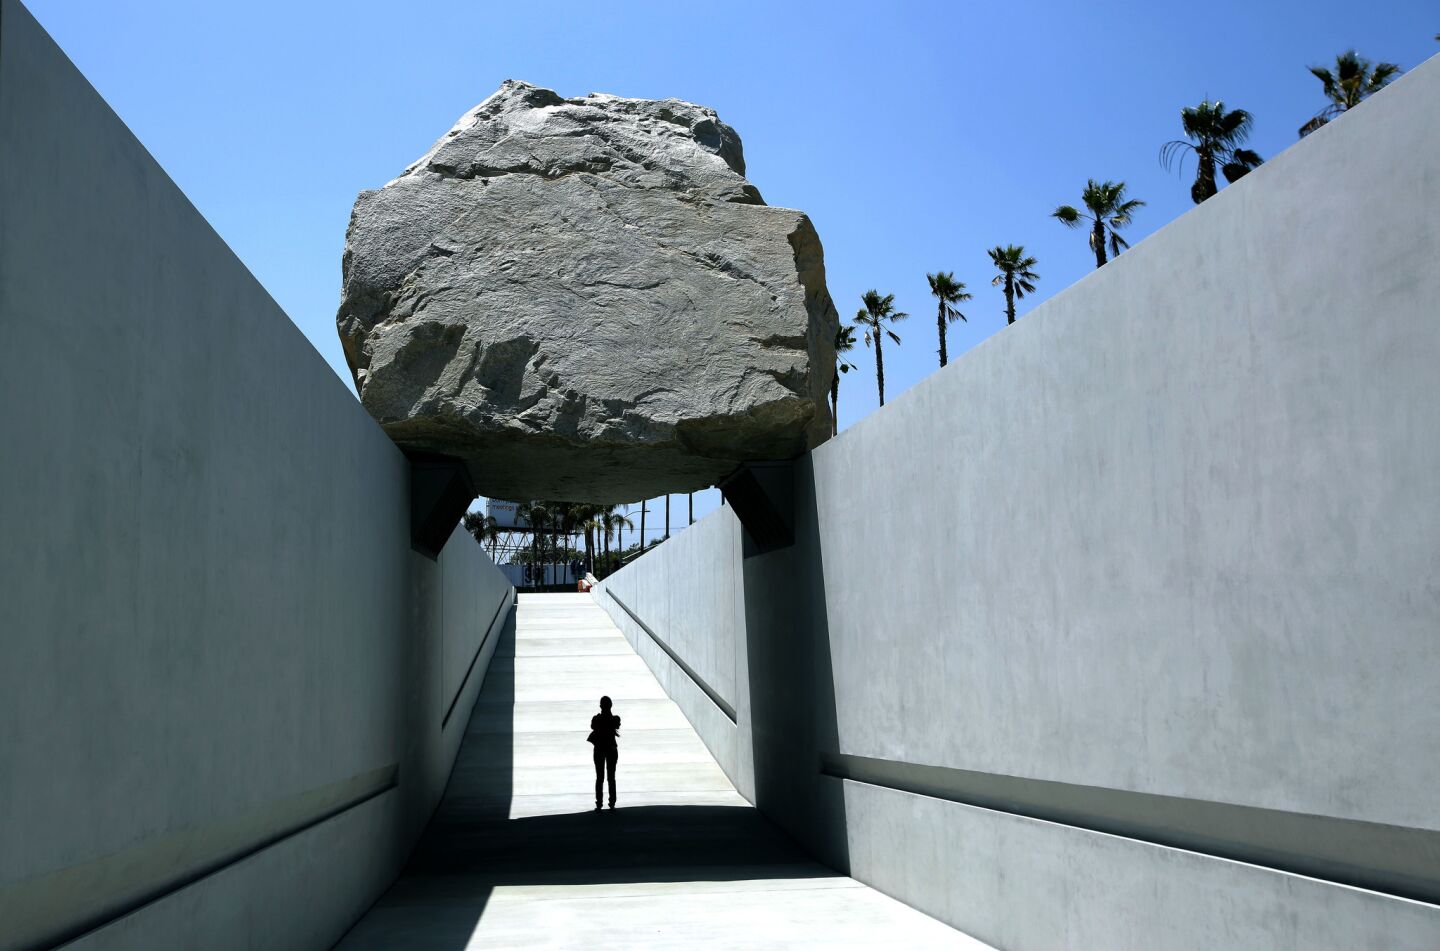 Arts and culture in pictures by The Times | 'Levitated Mass'